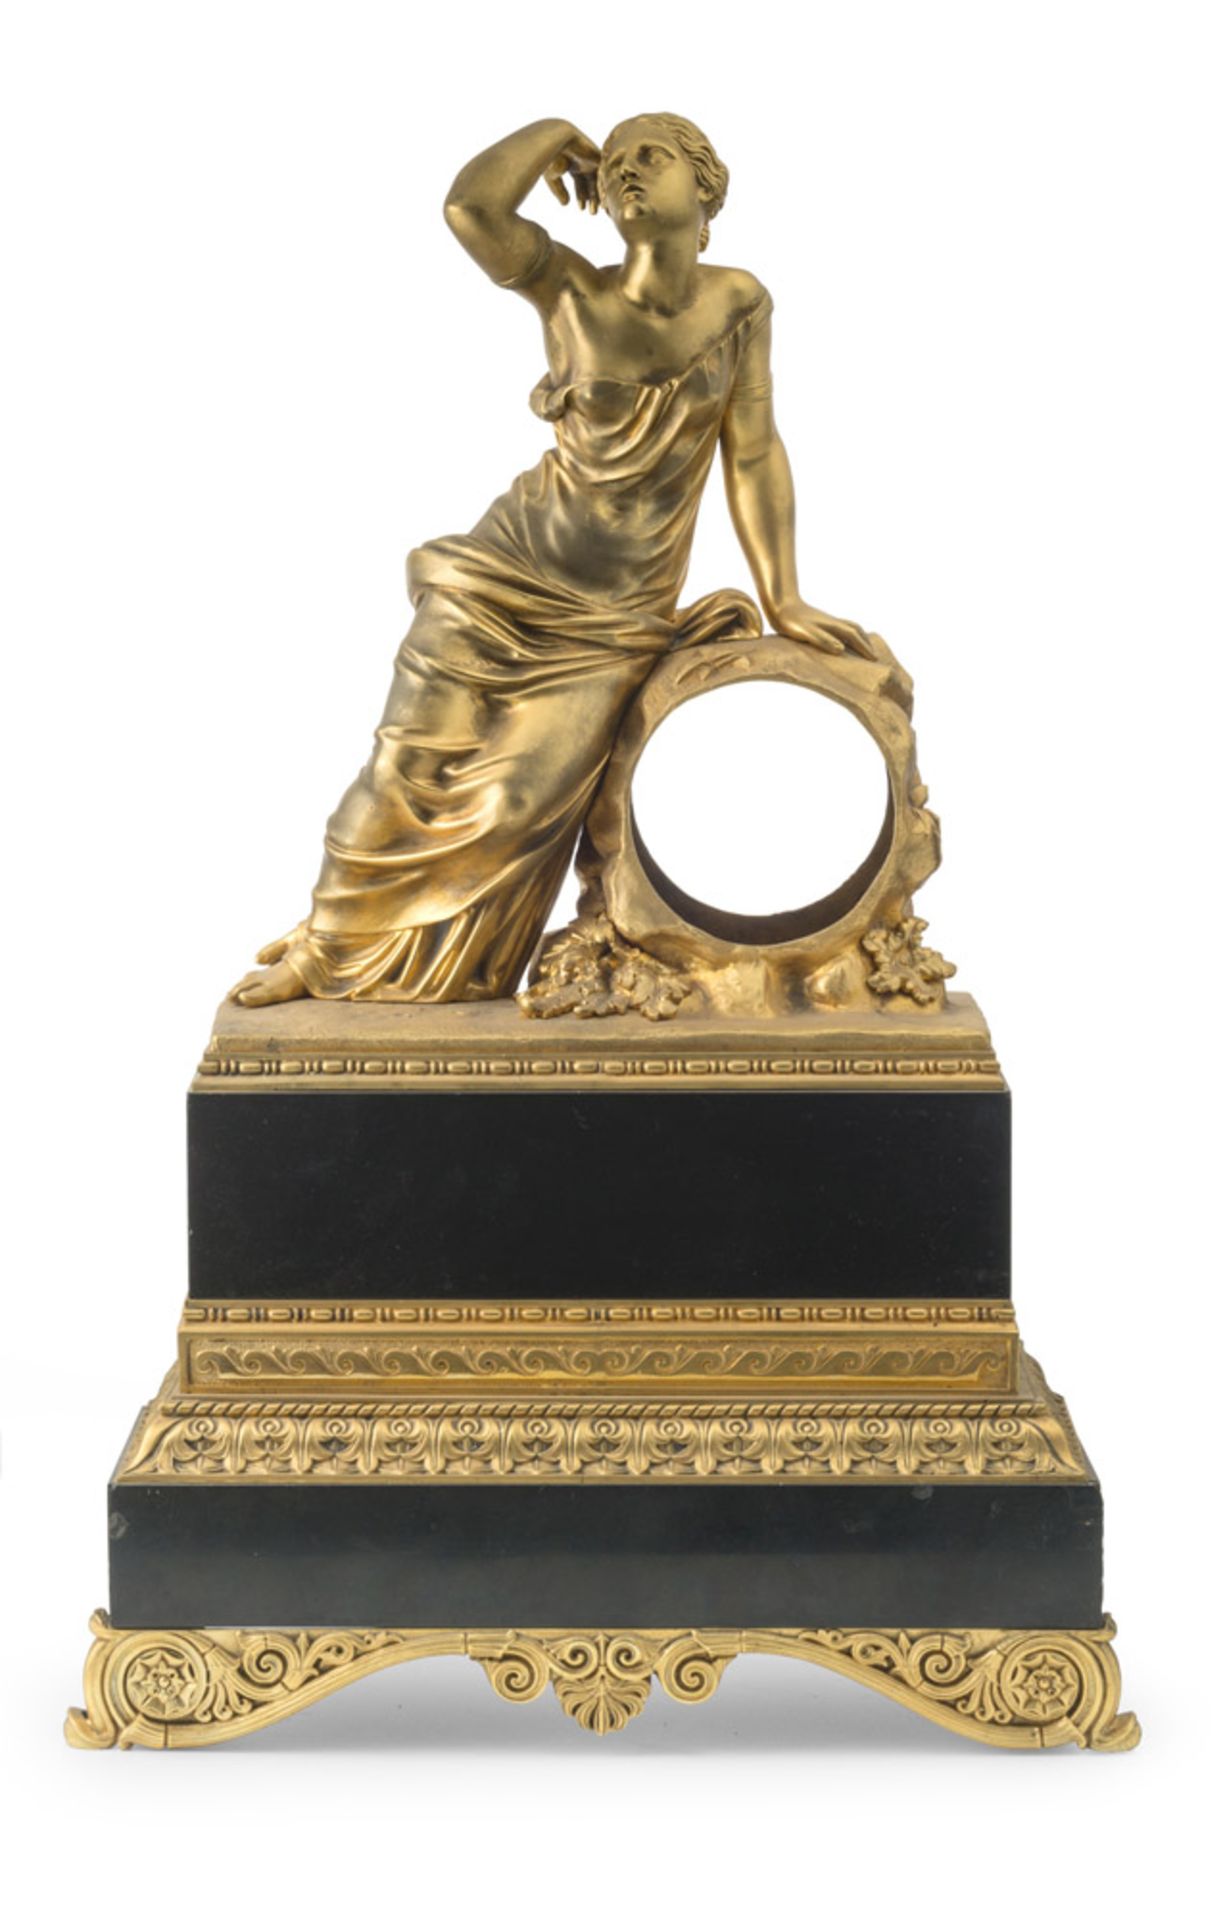 CASE OF TABLE CLOCK IN BRONZE AND BLACK MARBLE OF BELGIUM 19TH CENTURY with figure of allegorical